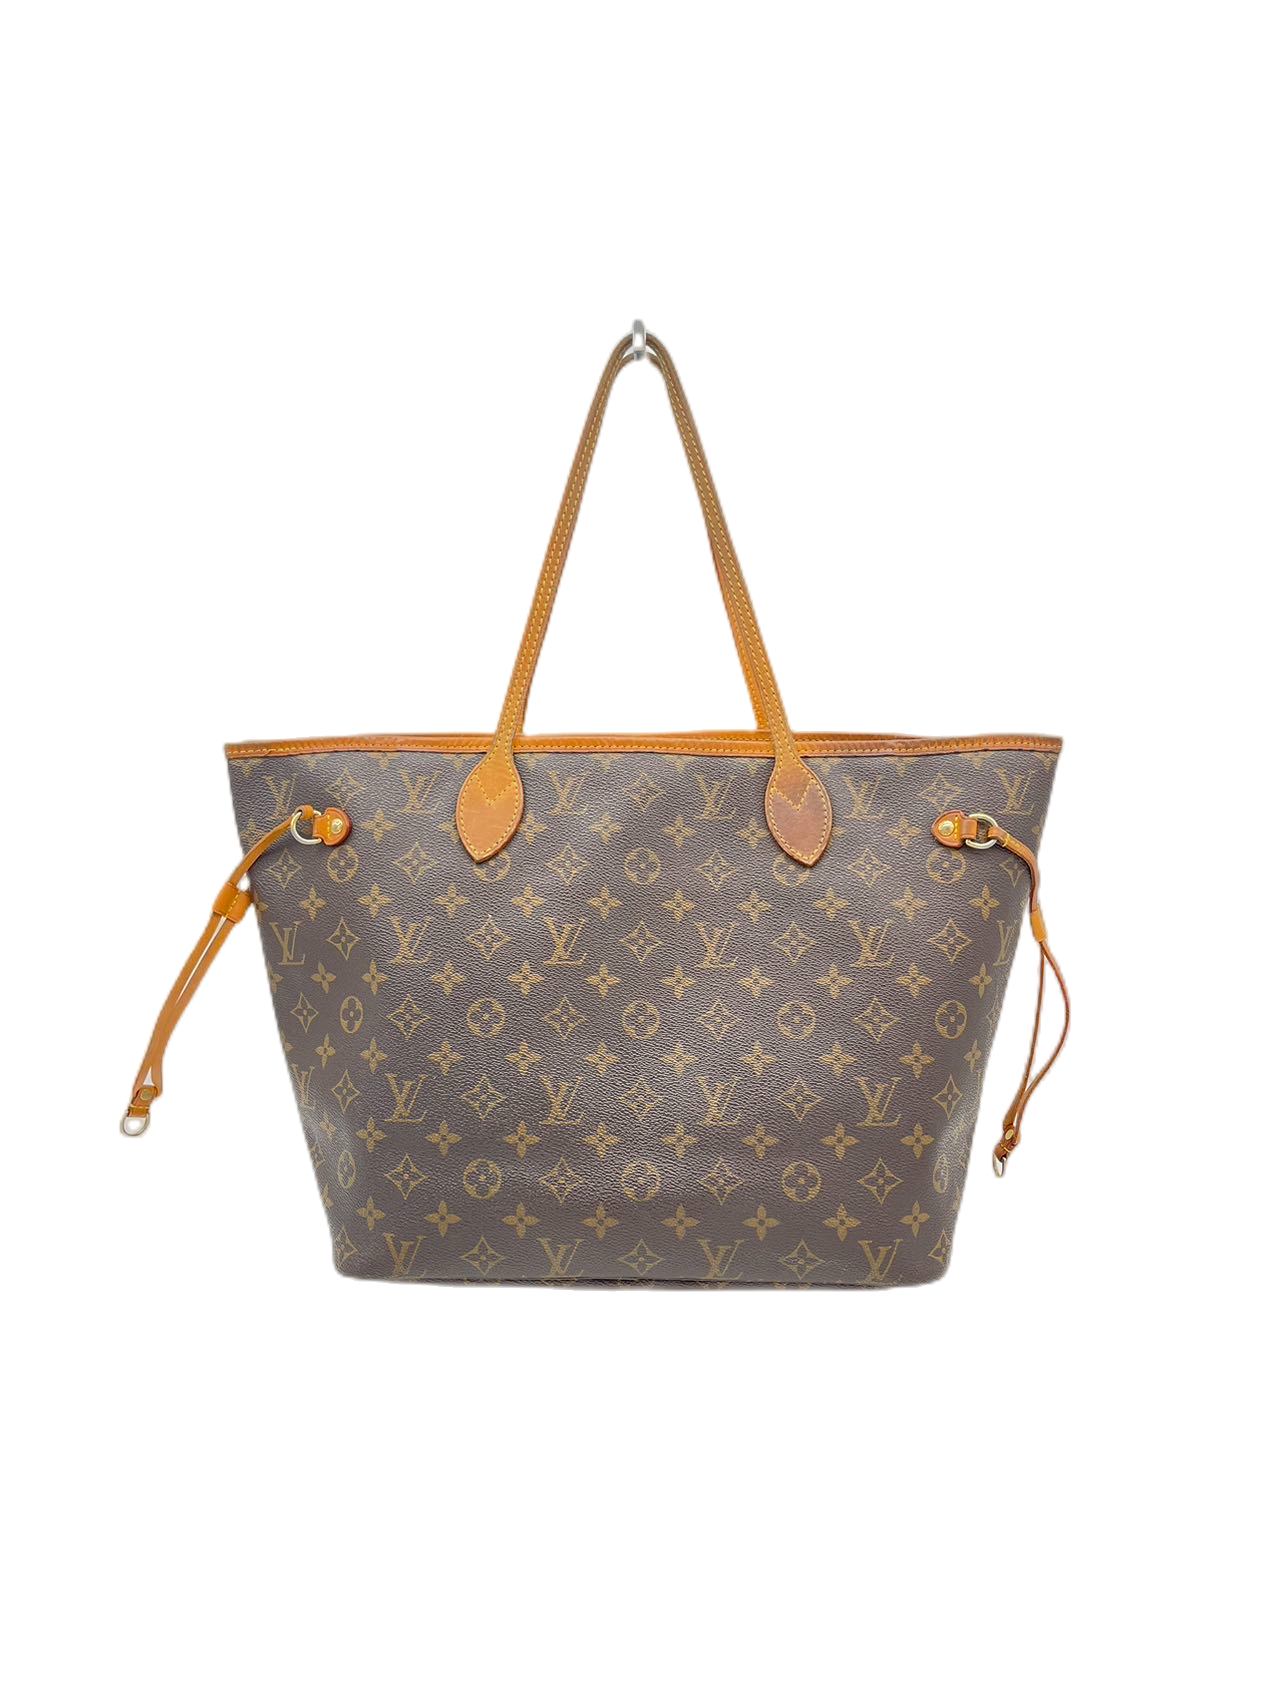 Preloved Louis Vuitton Monogram Canvas NeverFull MM Totes